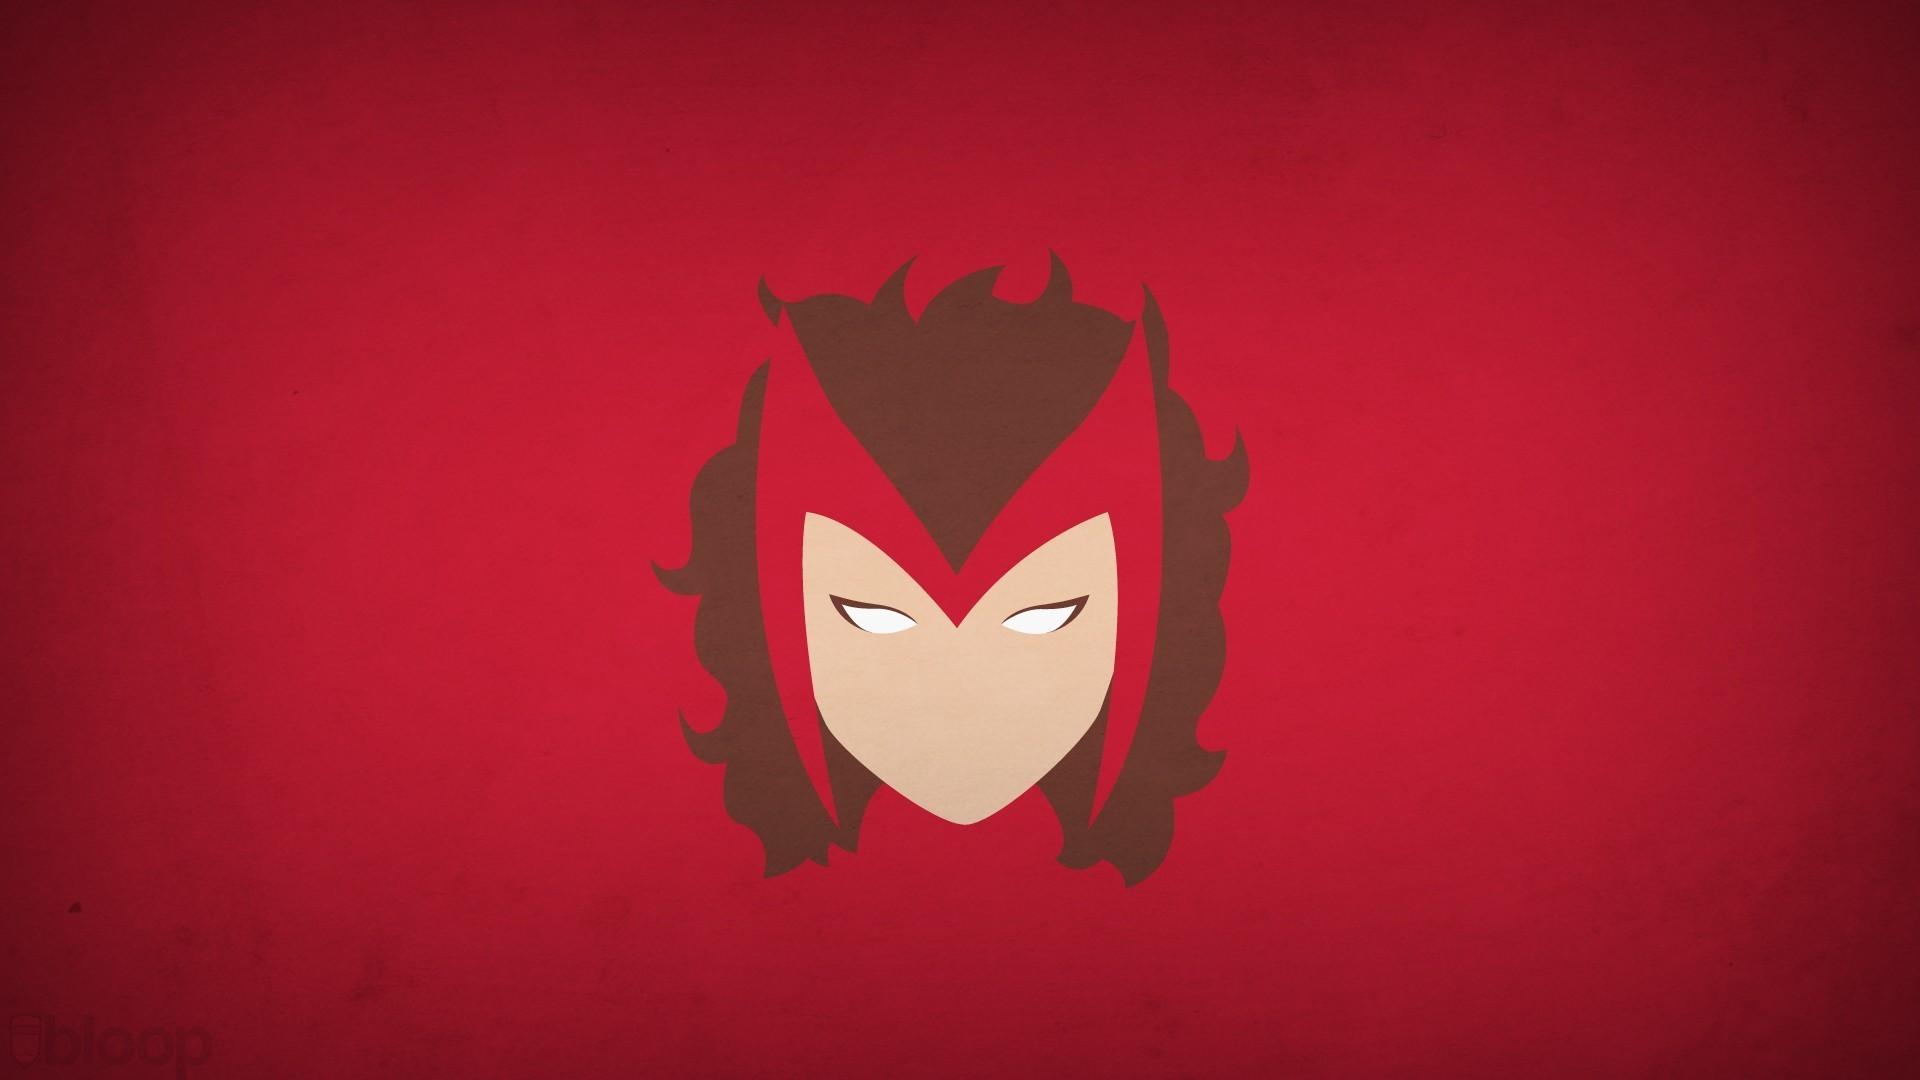 Minimalistic Marvel Comics Scarlet Witch Red Background Blo0p Wallpaper 5247